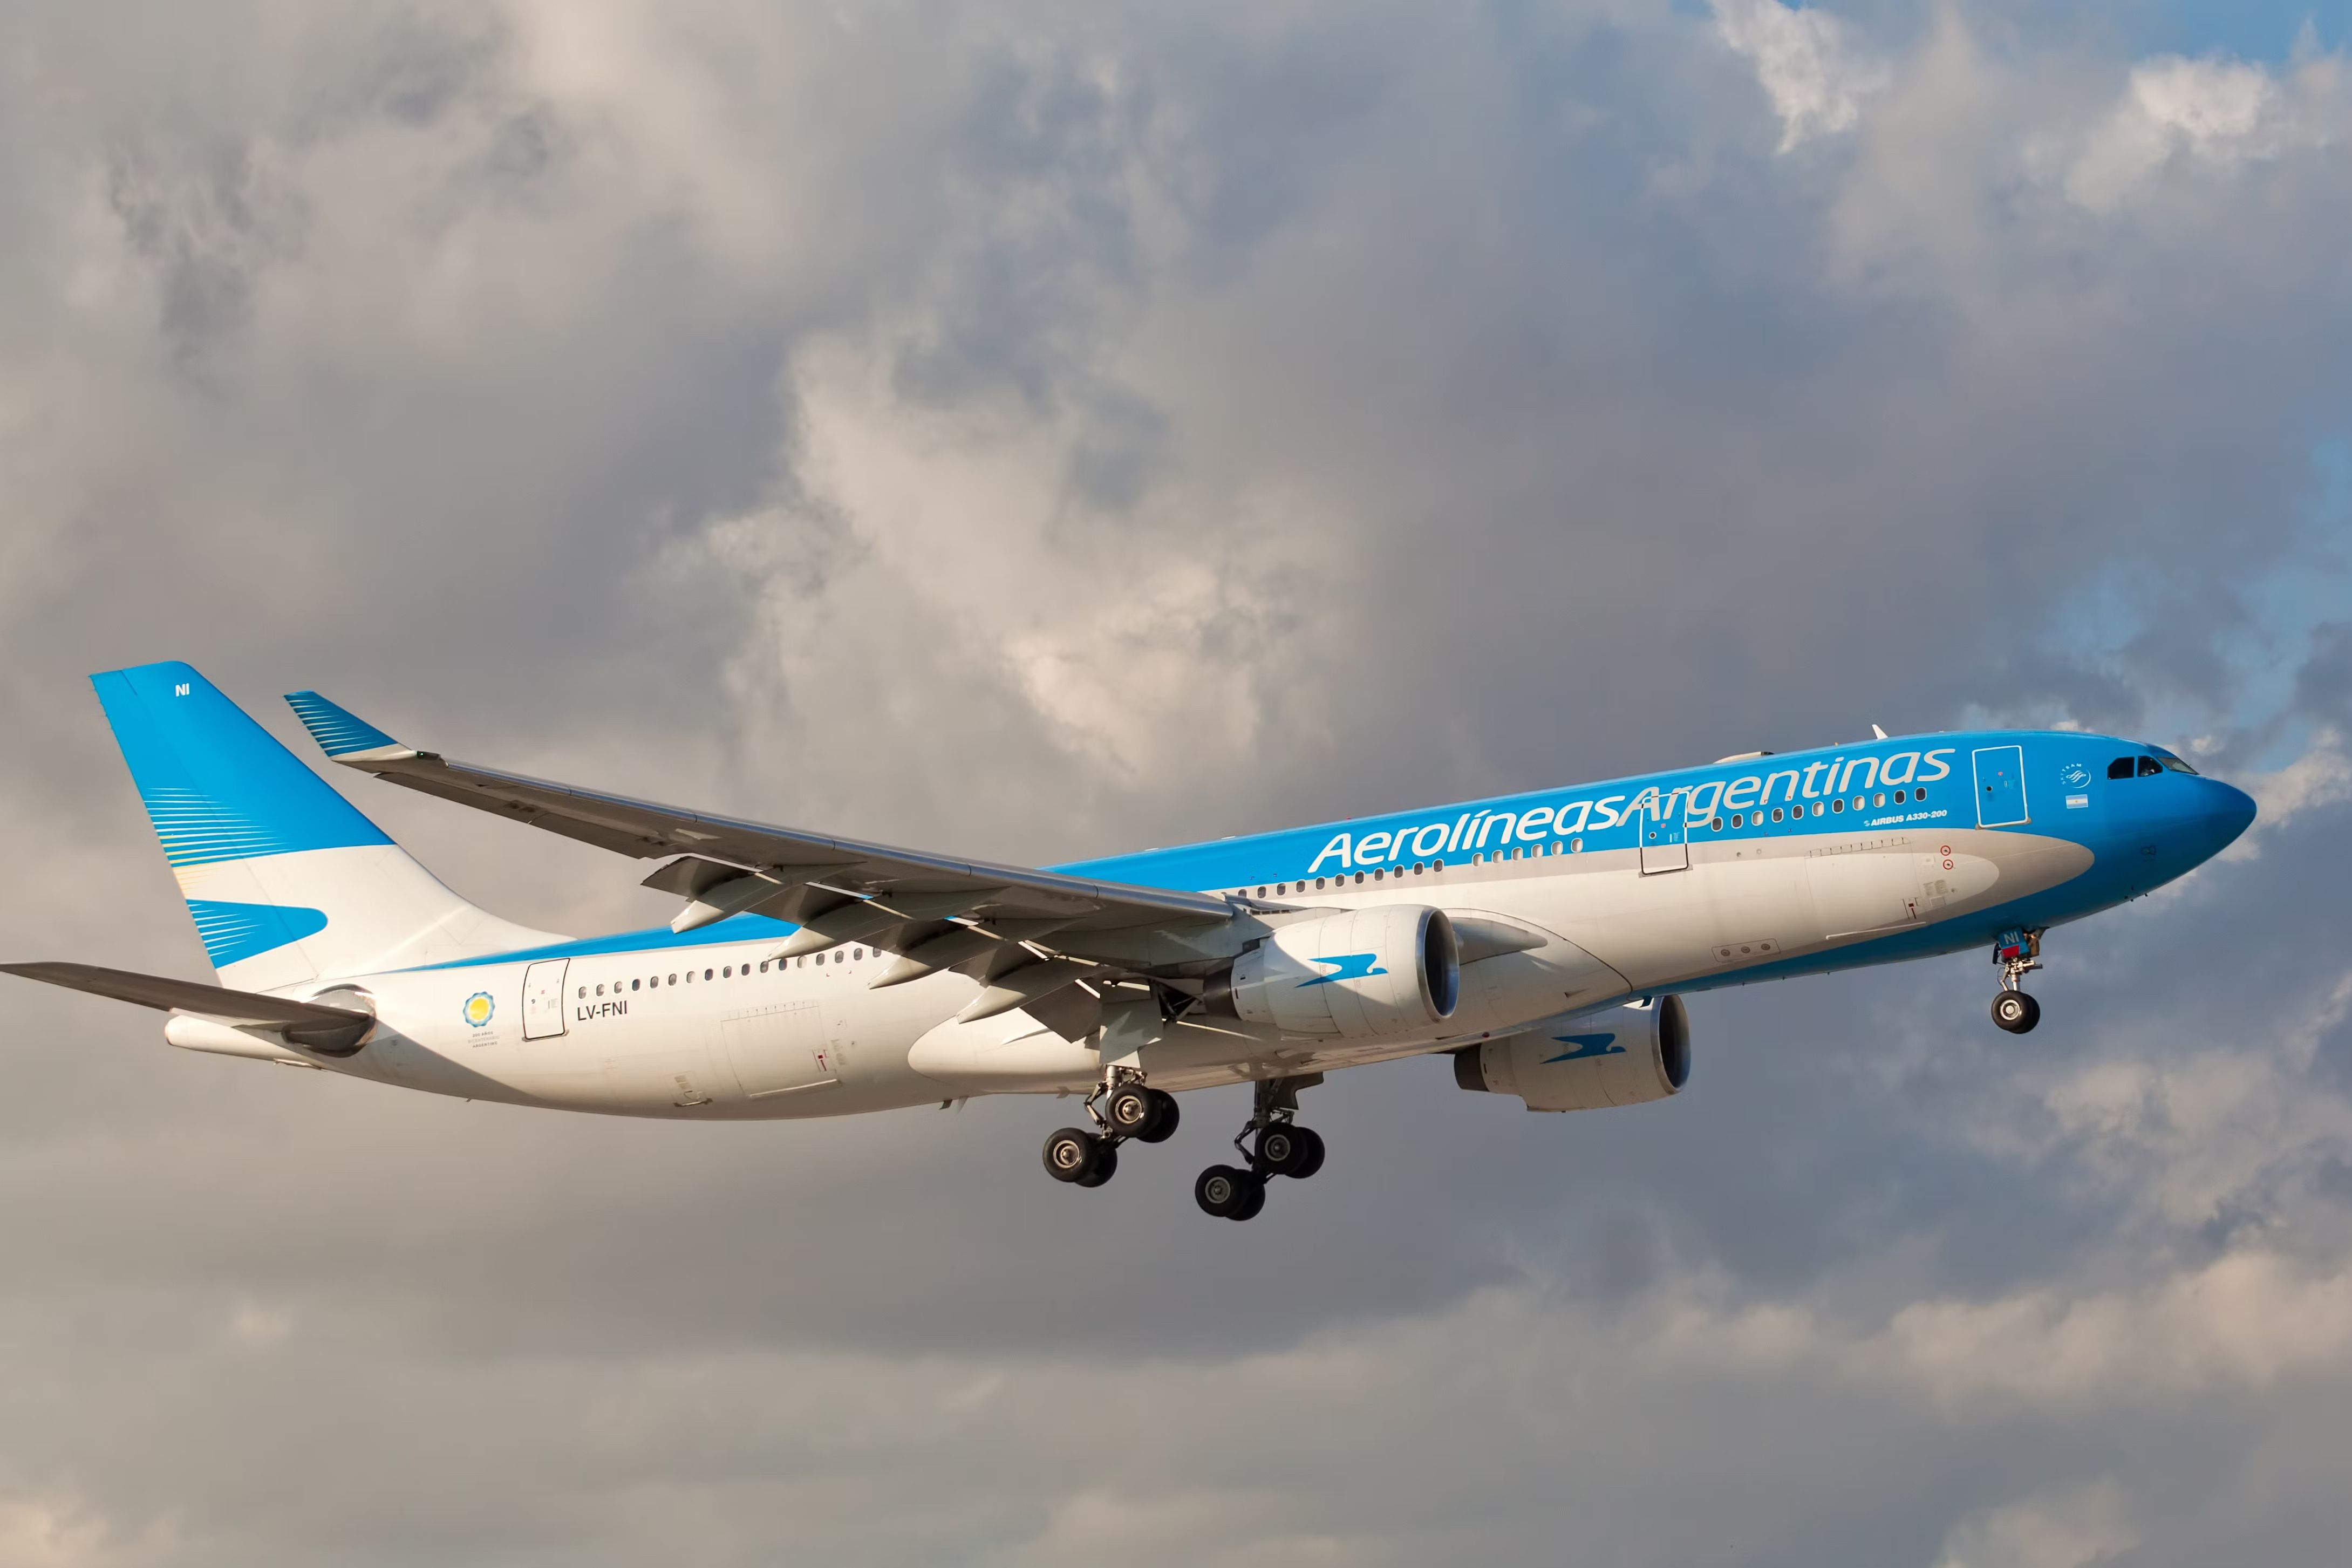 An Aerolineas Argentinas Airbus A330 Flying in the sky.